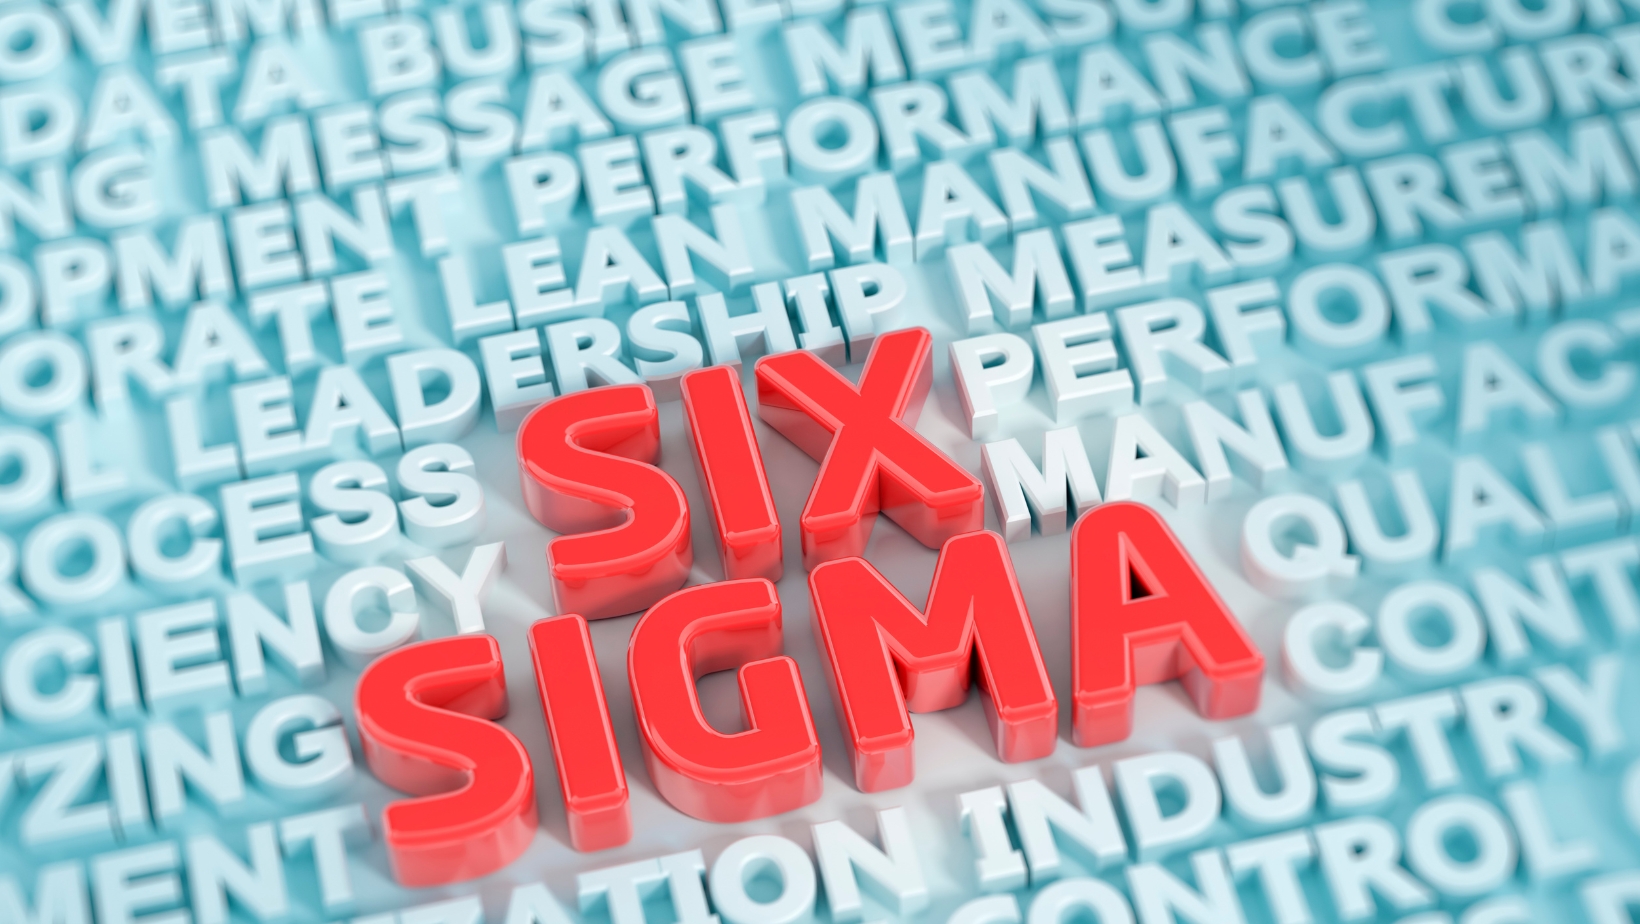 six sigma white belt exam questions and answers pdf